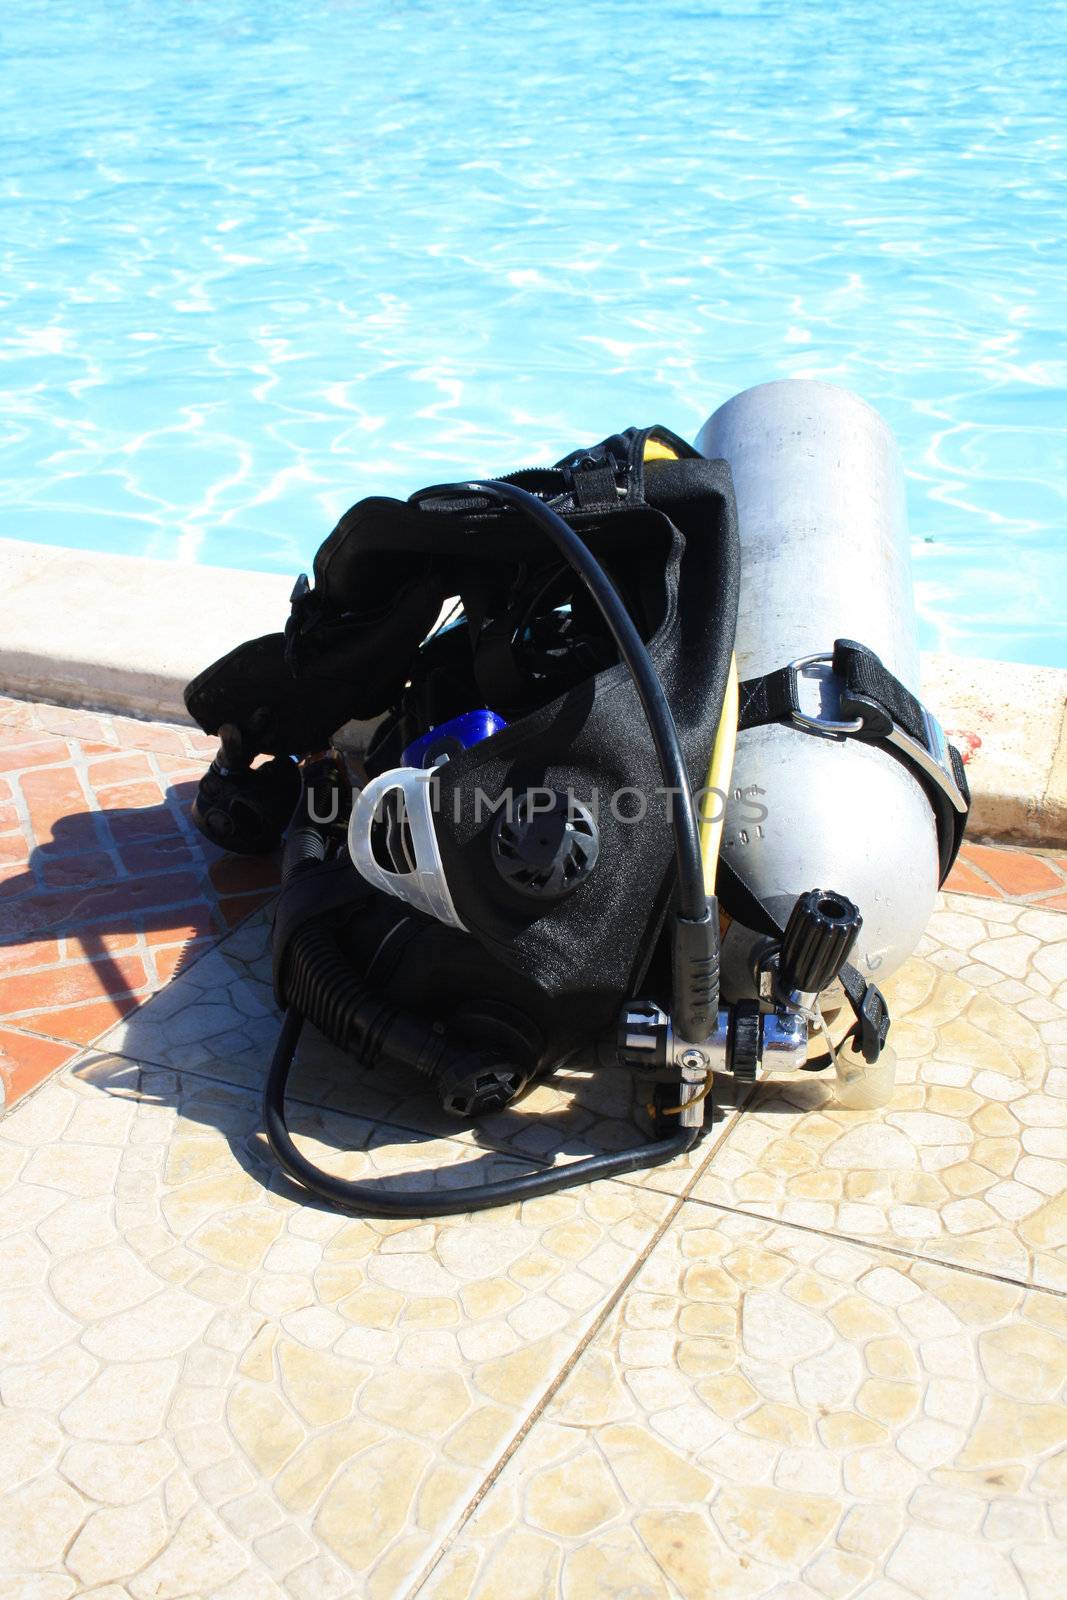 diving equipment by photochecker